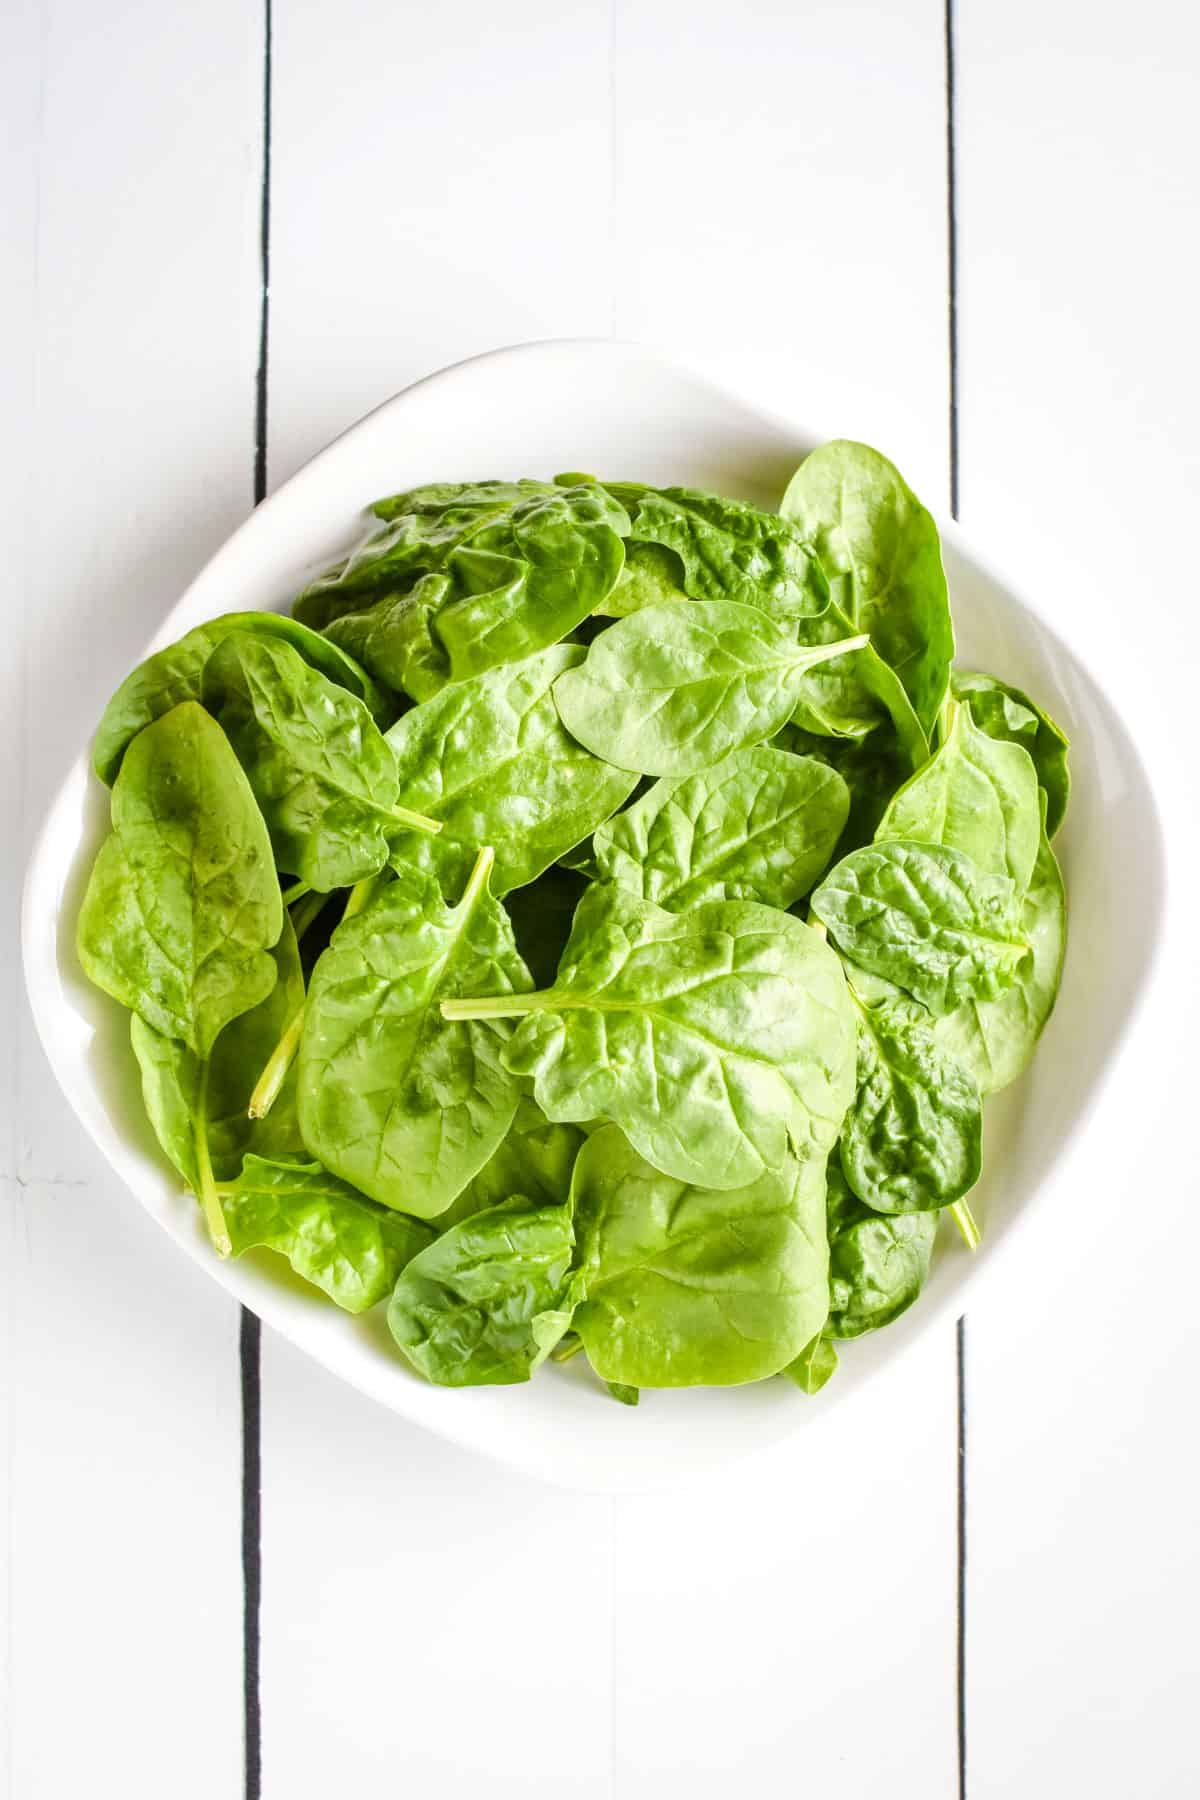 Spinach leaves on a plate.